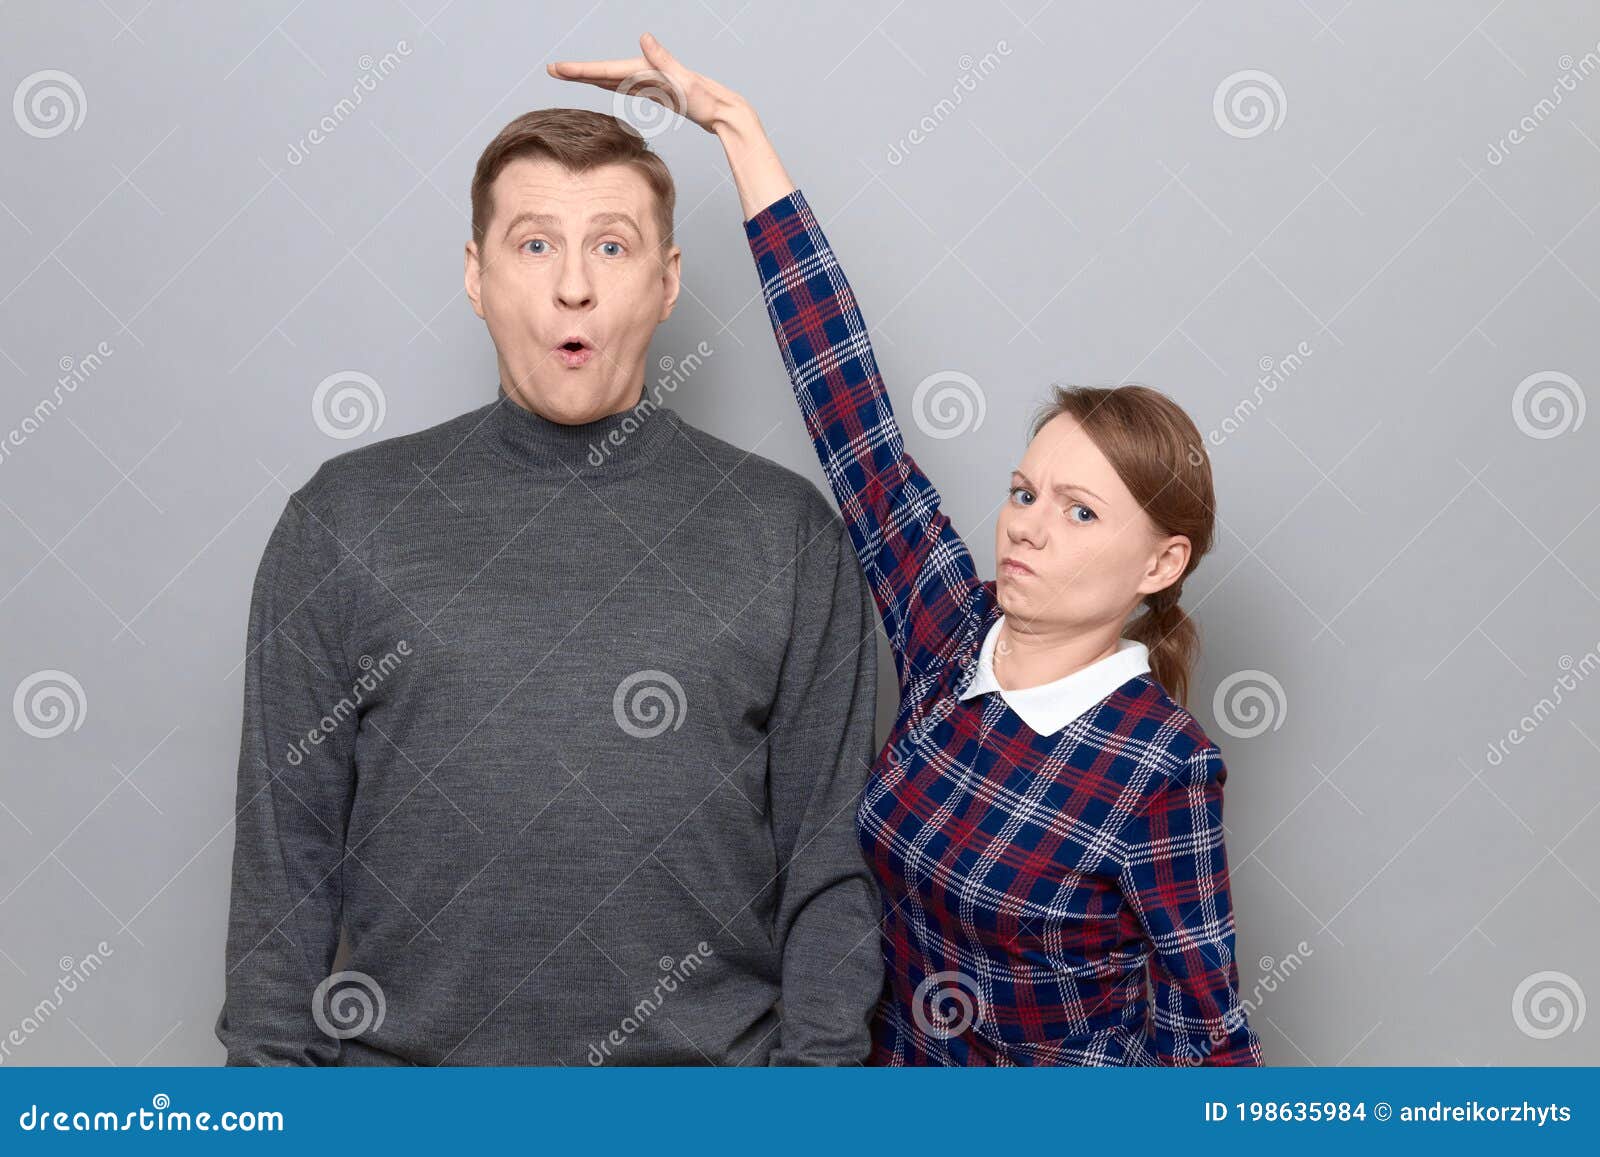 335 Tall Woman Short Man Stock Photos - Free & Royalty-Free Stock Photos  from Dreamstime